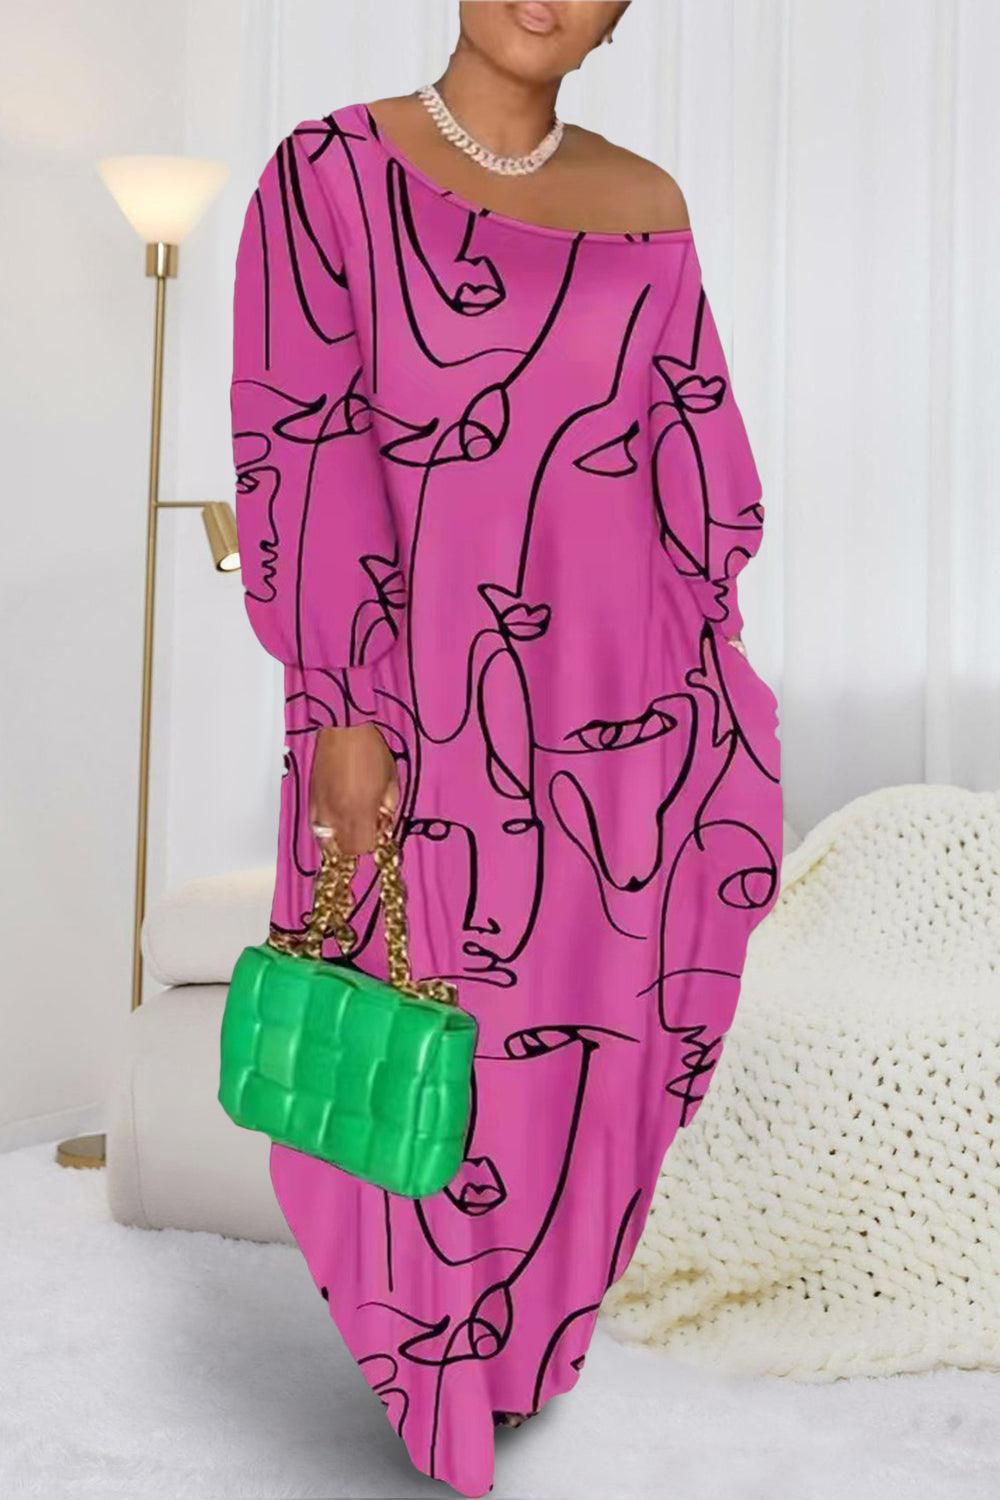 a woman in a pink dress holding a green purse